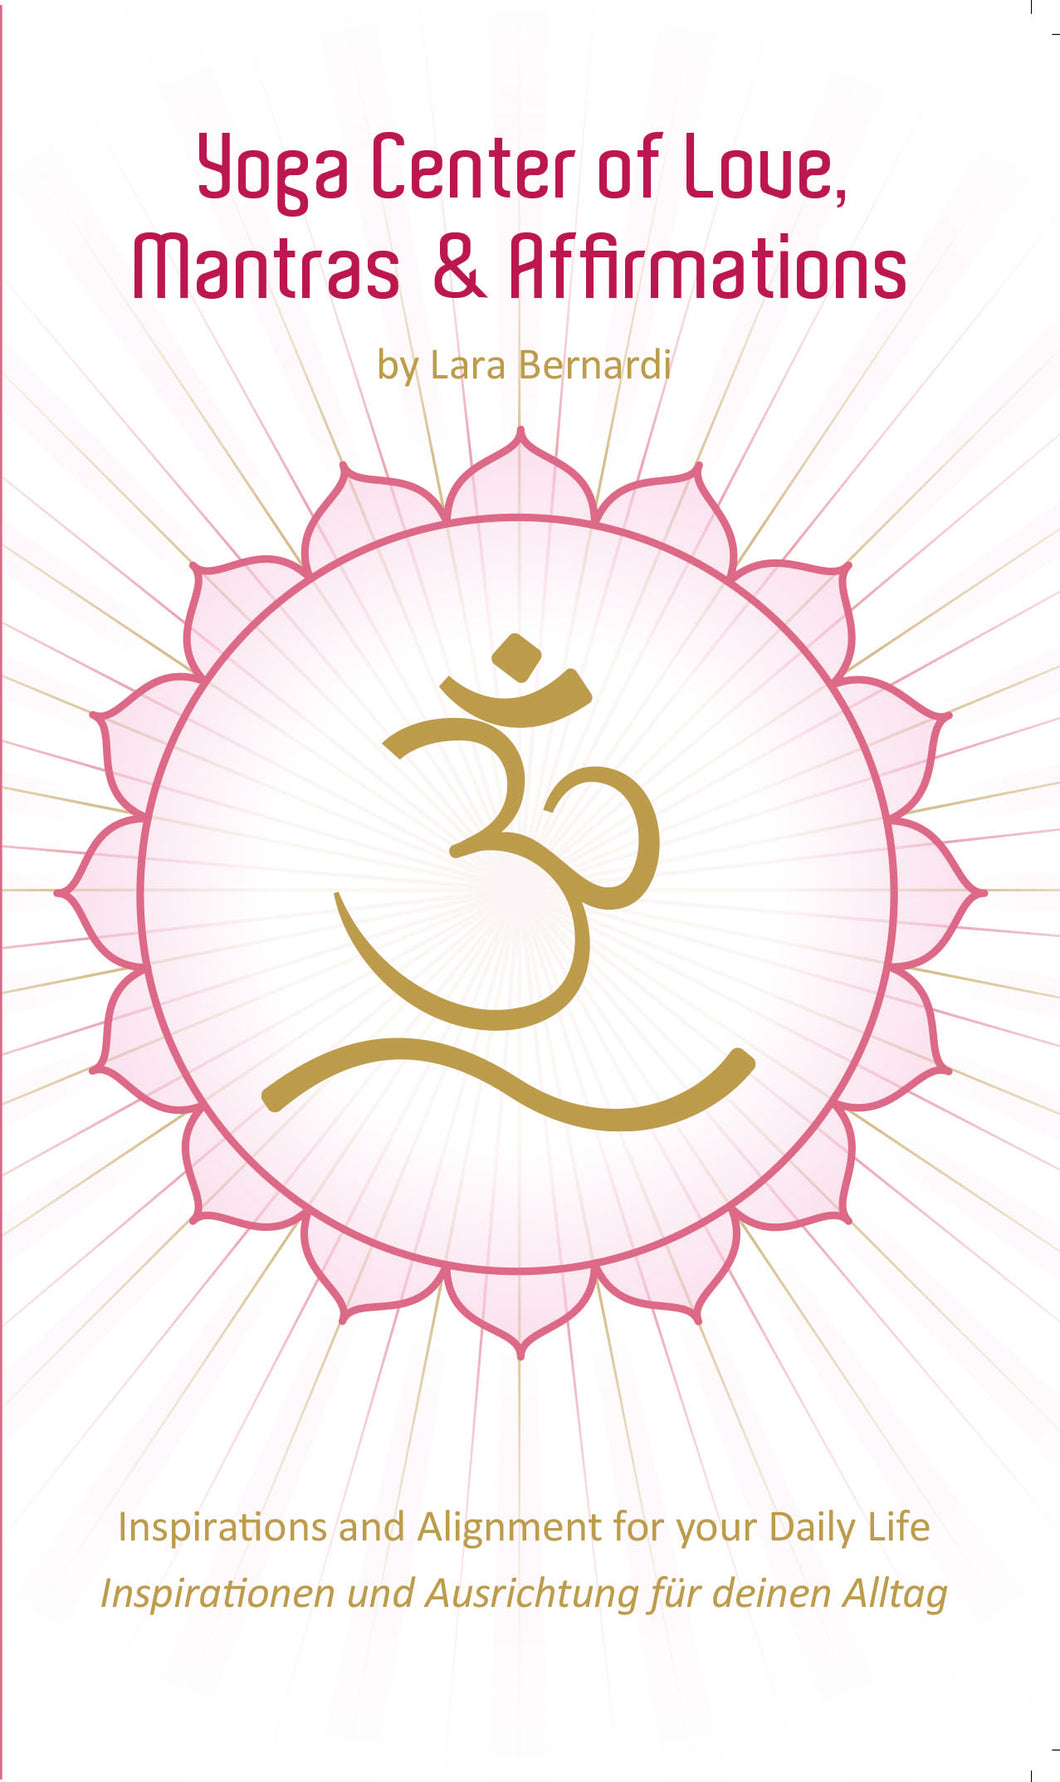 Buchen Sie „Yoga Center of Love, Mantras & Affirmations, Inspirations and Alignment for your Daily Life“, Lara Bernardi (ca. Rs. 1707)